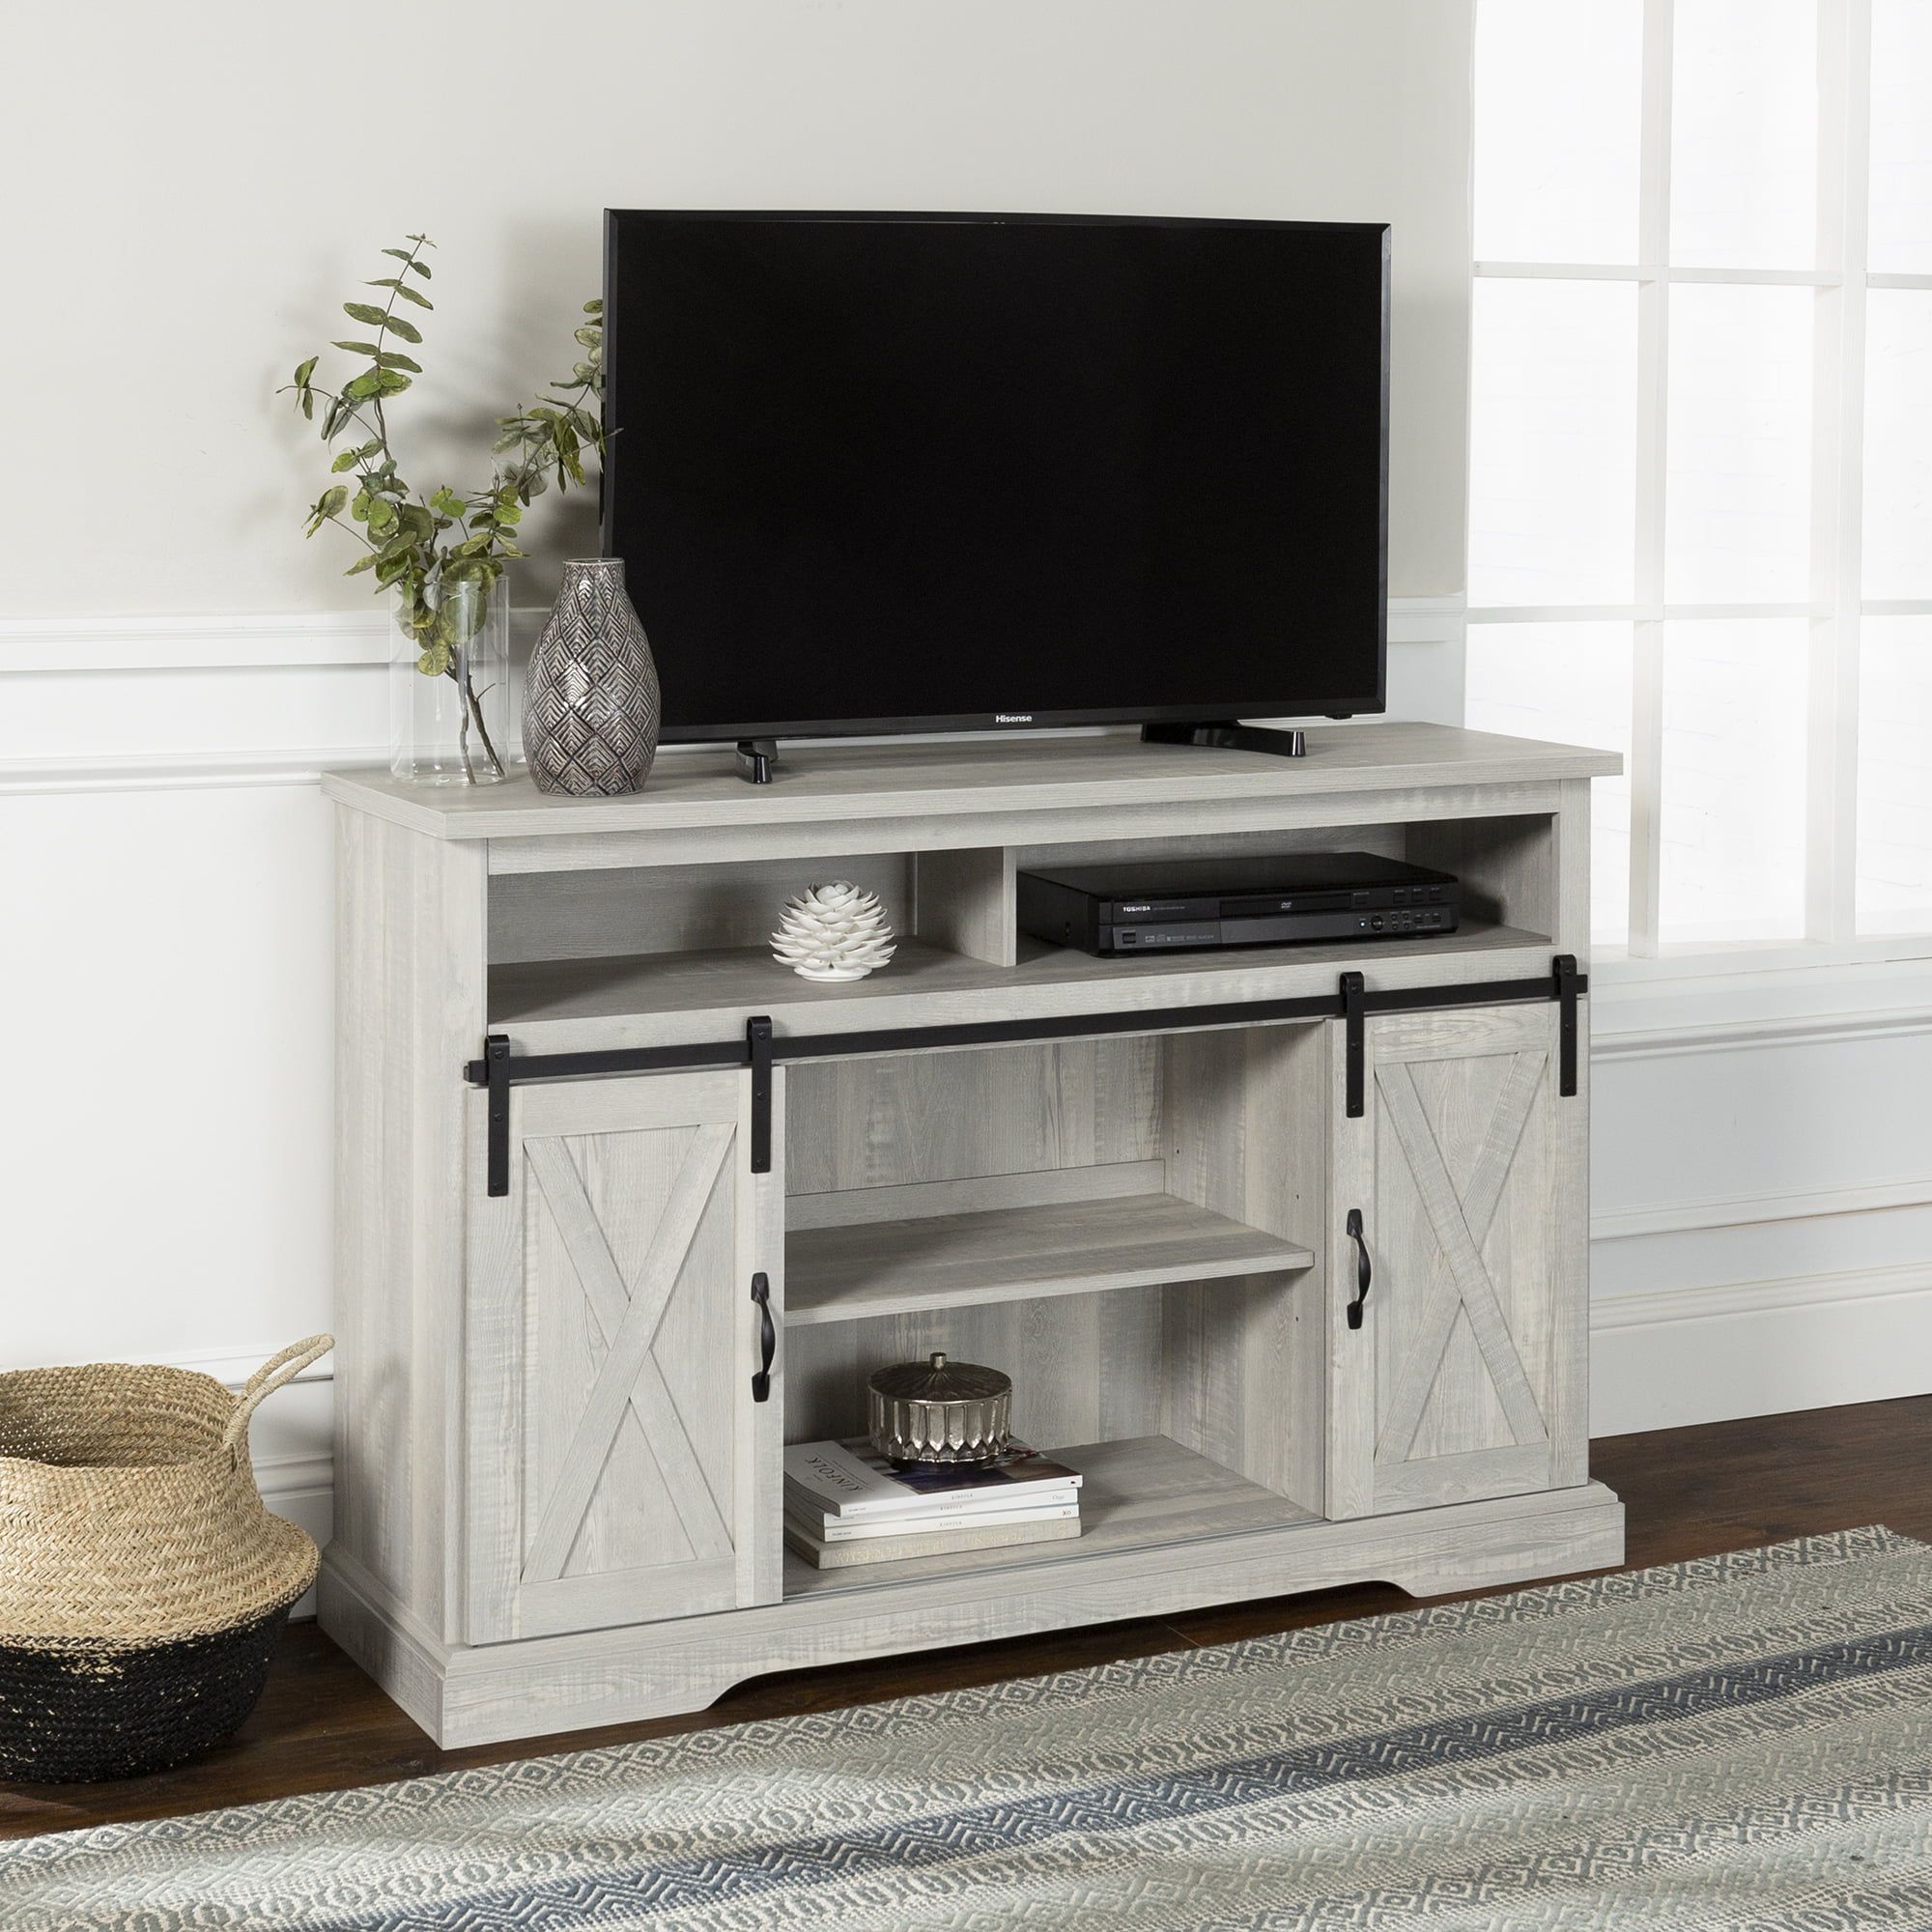 Manor Park Farmhouse Barn Door Tv Stand For Tvs Up To 58", Stone Grey Within Modern Farmhouse Barn Tv Stands (Gallery 19 of 20)